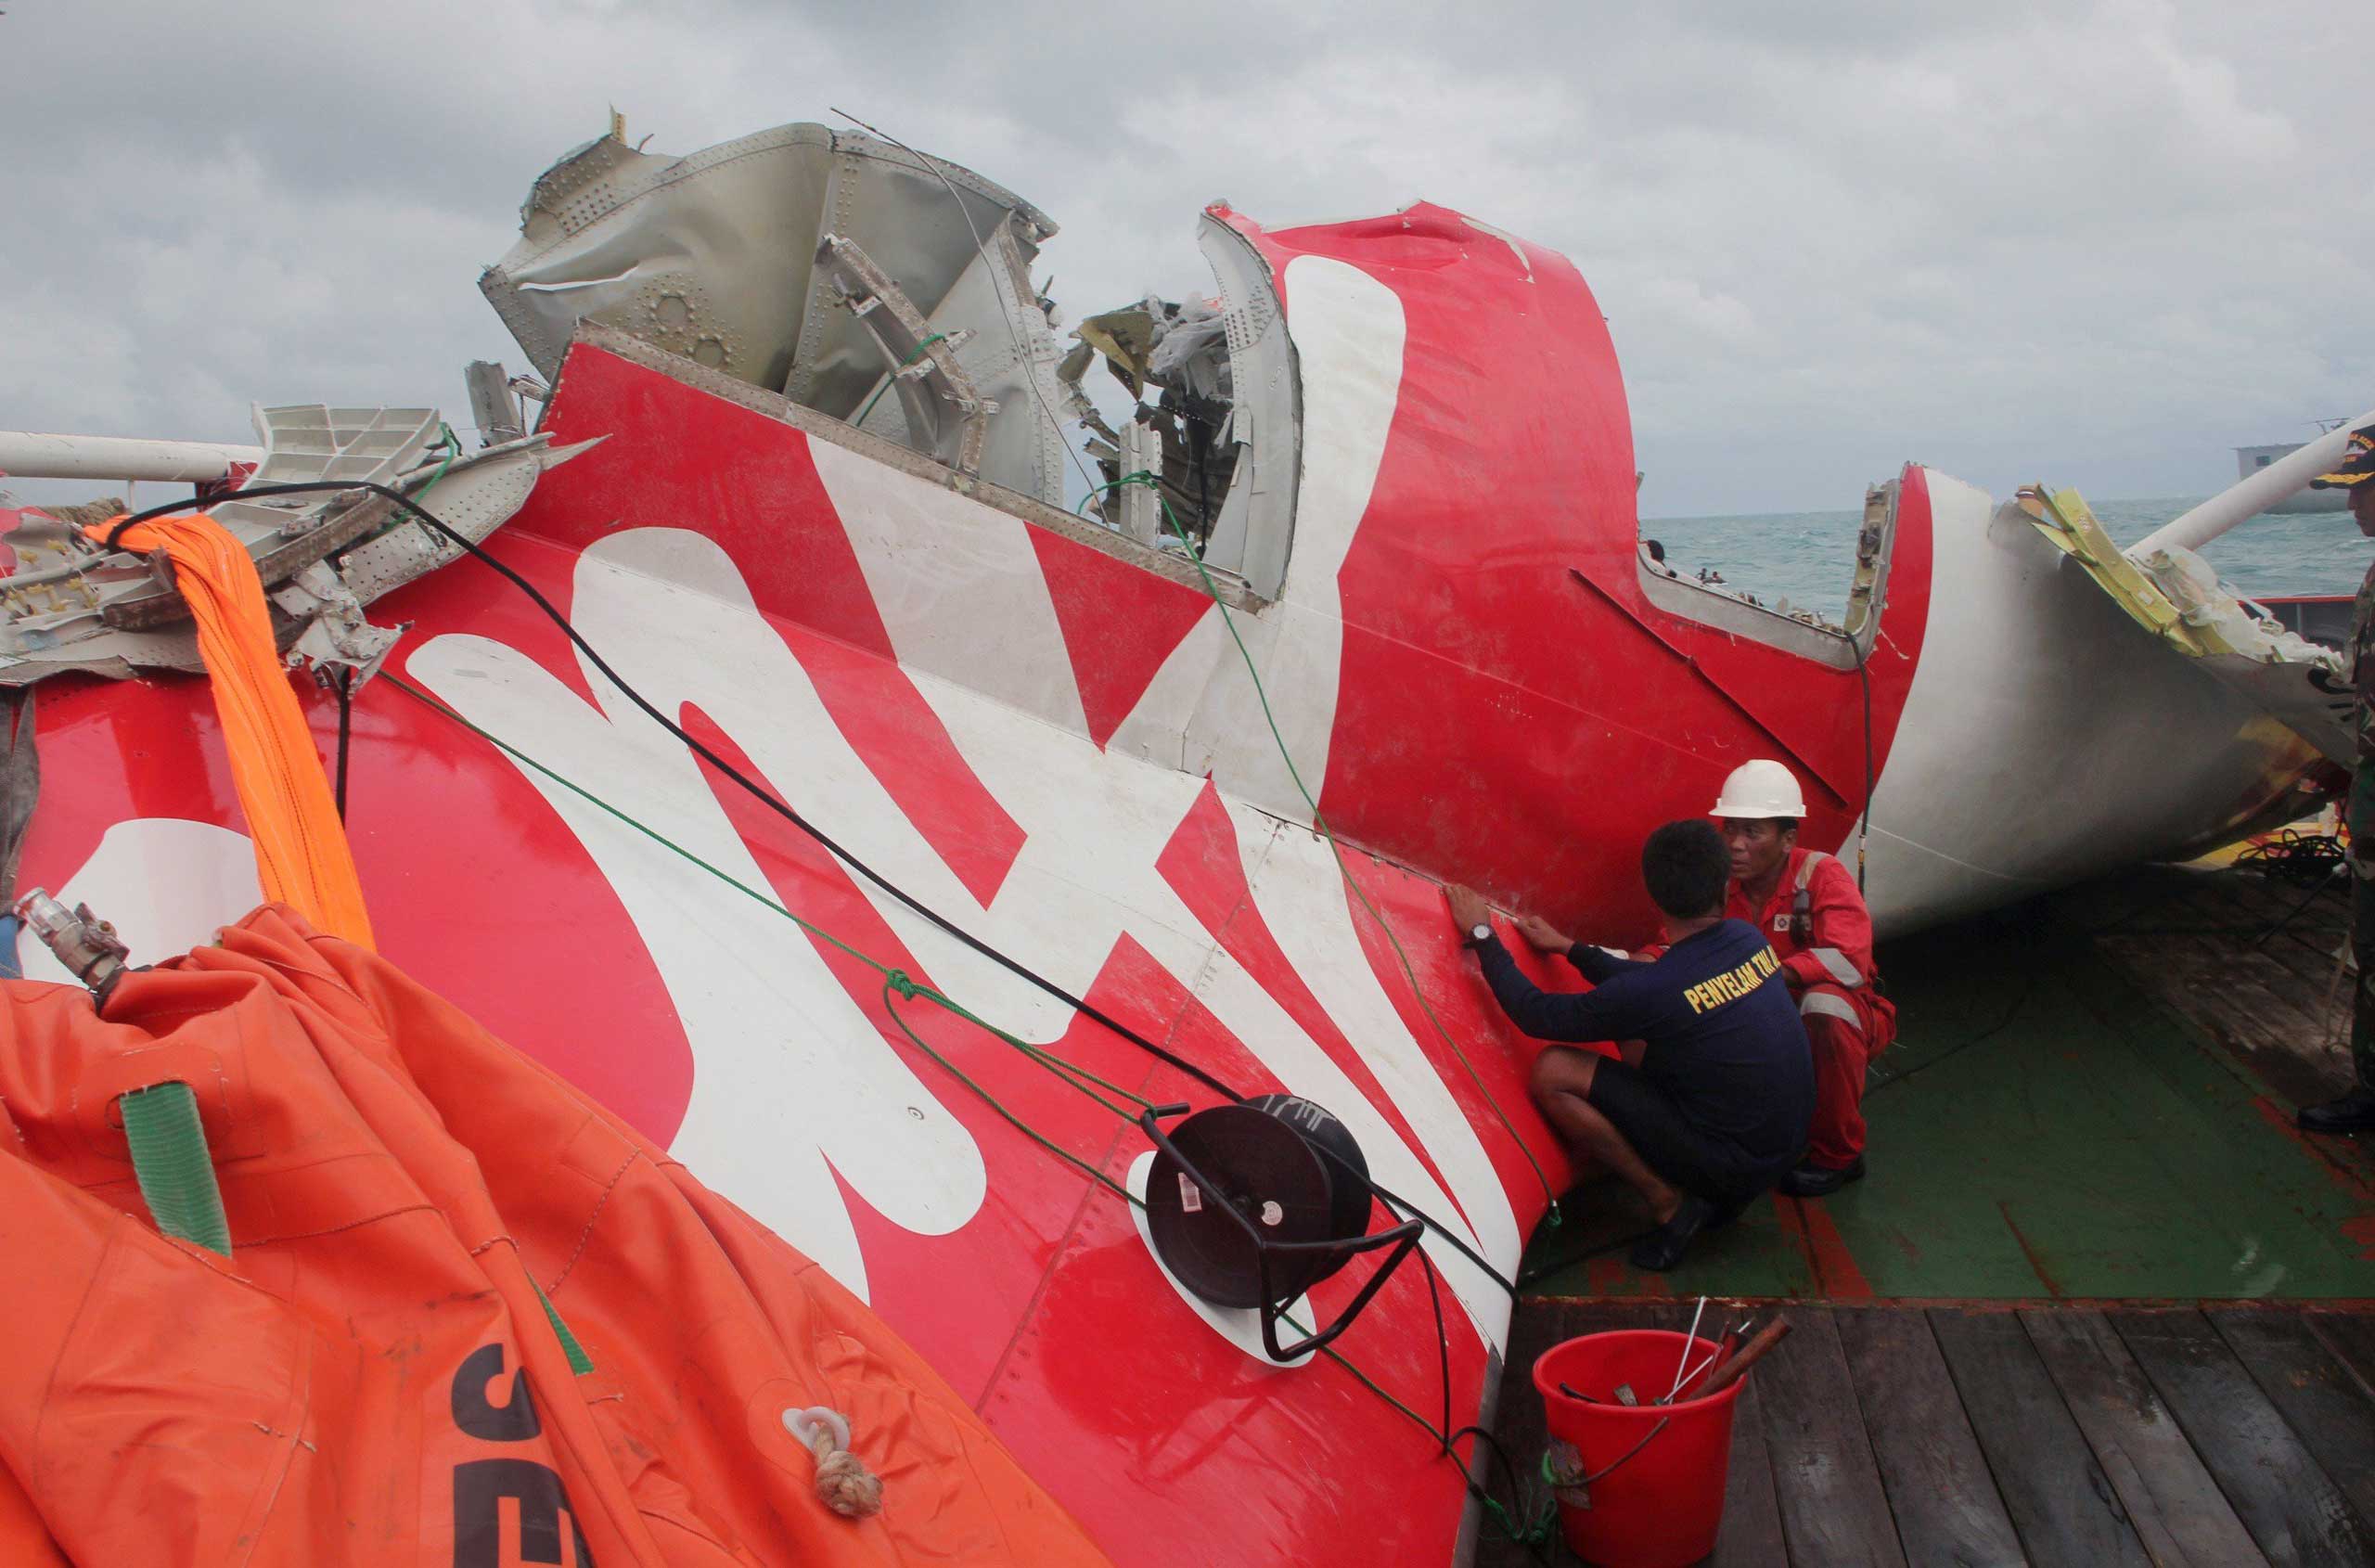 An Indonesian diver and an official examine the wreckage from AirAsia flight QZ8501 after it was lifted into the Crest Onyx ship at sea, near Indonesia on Jan. 10, 2015. (AFP/Getty Images)